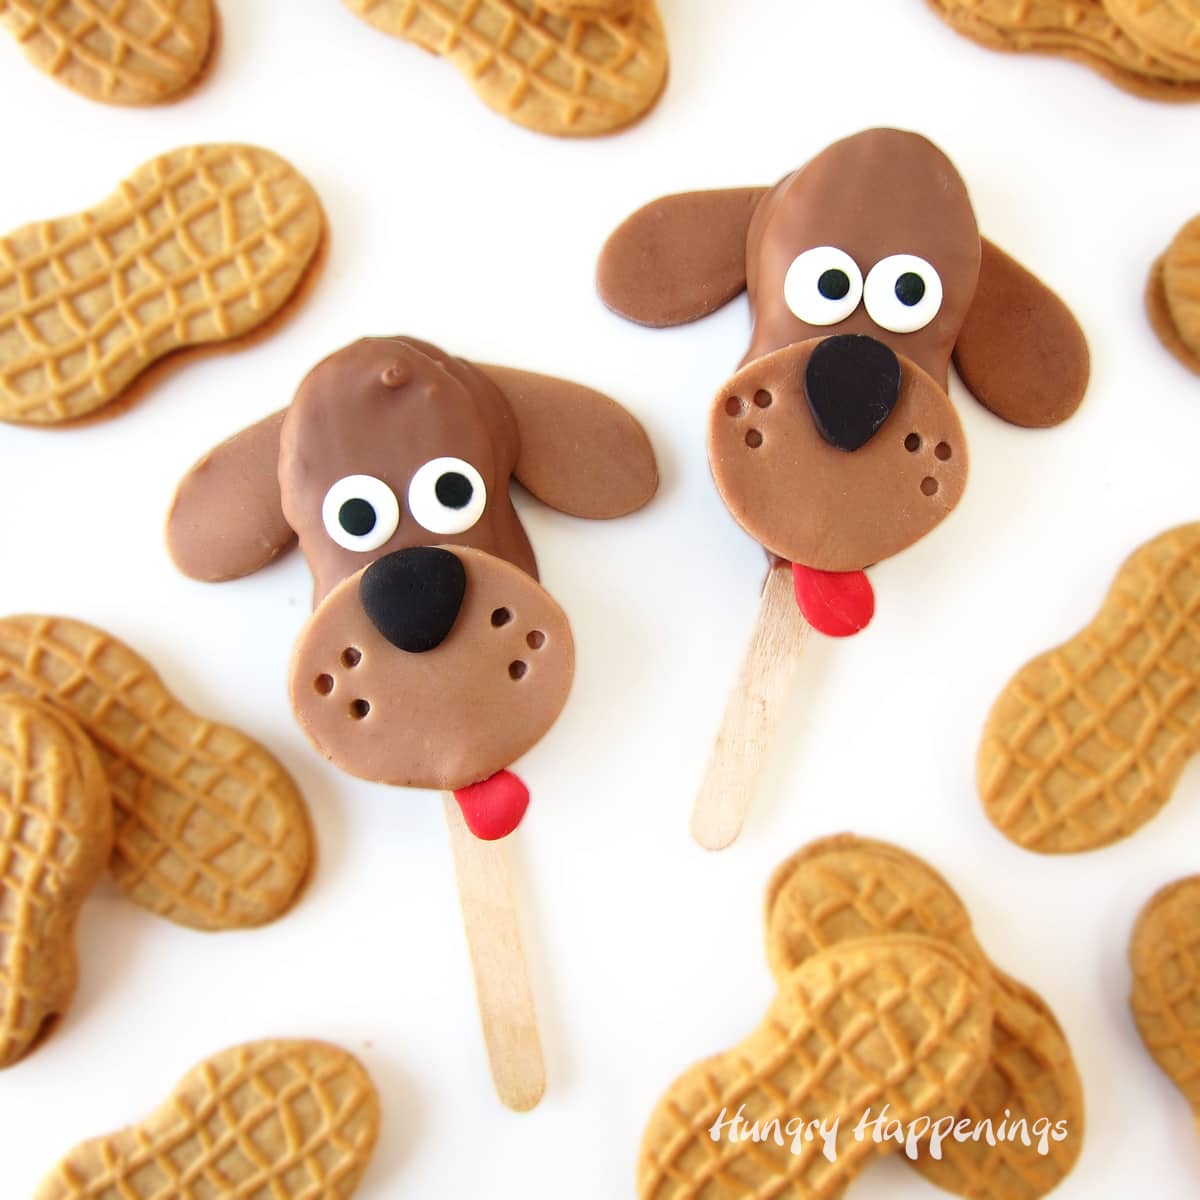 chocolate dogs made from chocolate-dipped Nutter Butter Cookies decorated with modeling chocolate and candy eyes are surrounded by plain cookies.